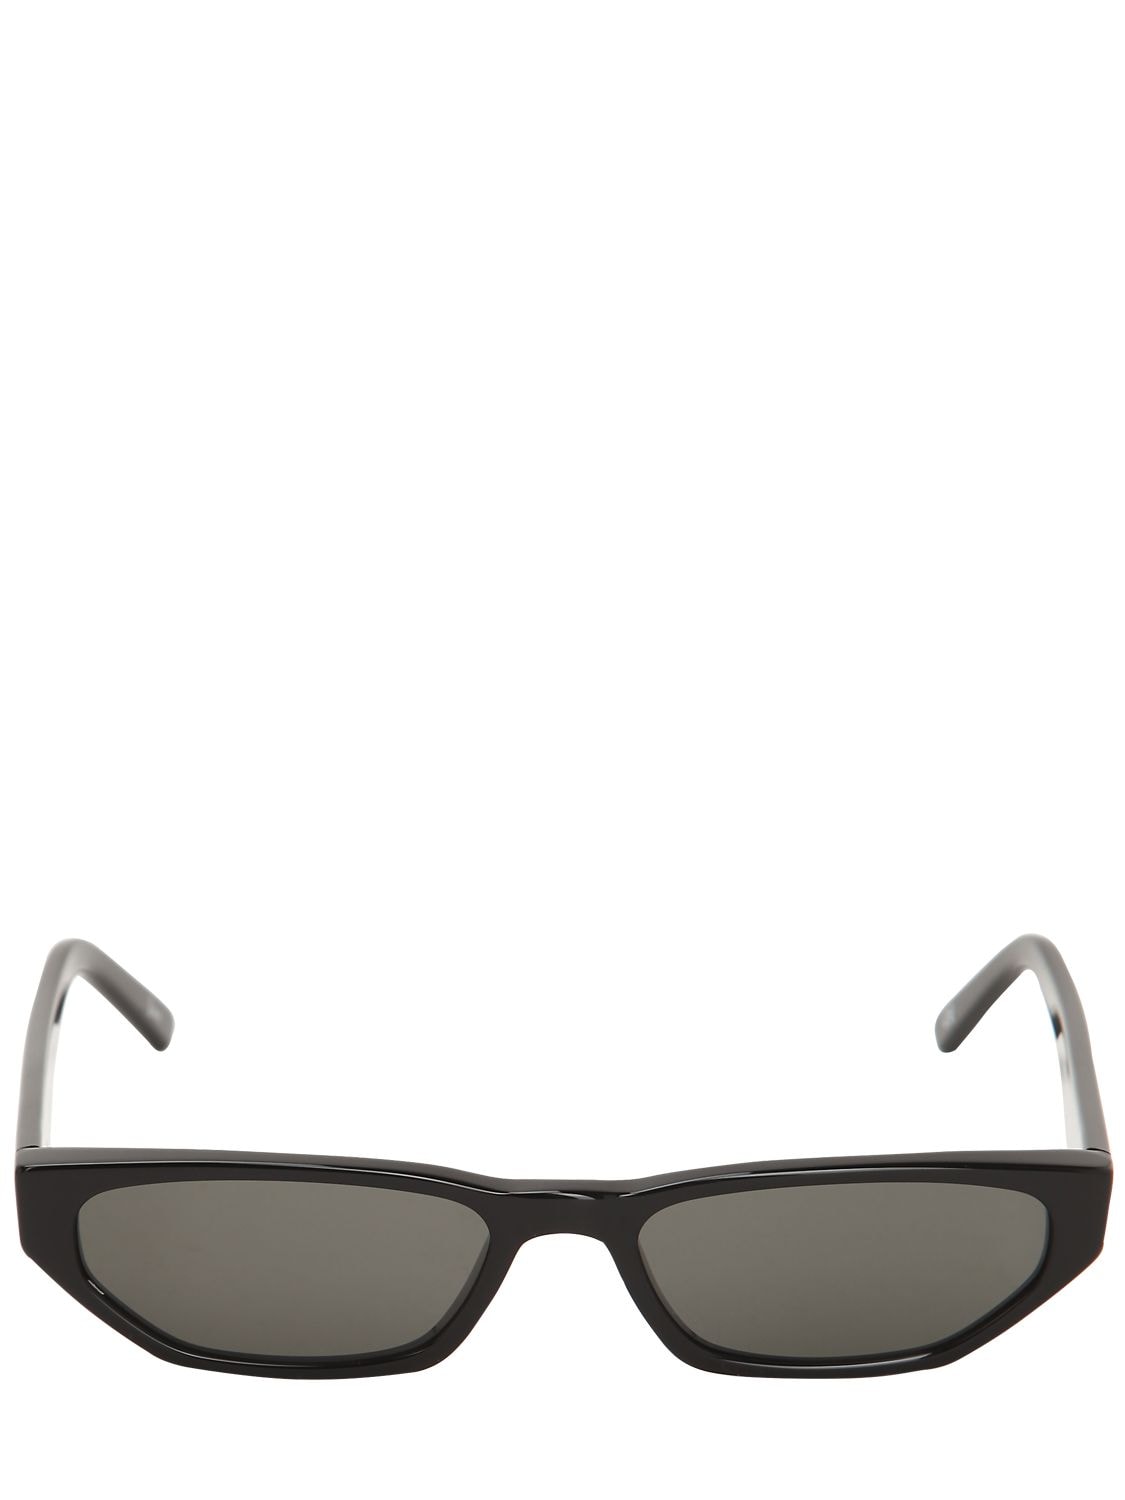 Andy Wolf Tamsyn Small Cat-eye Acetate Sunglasses In Black